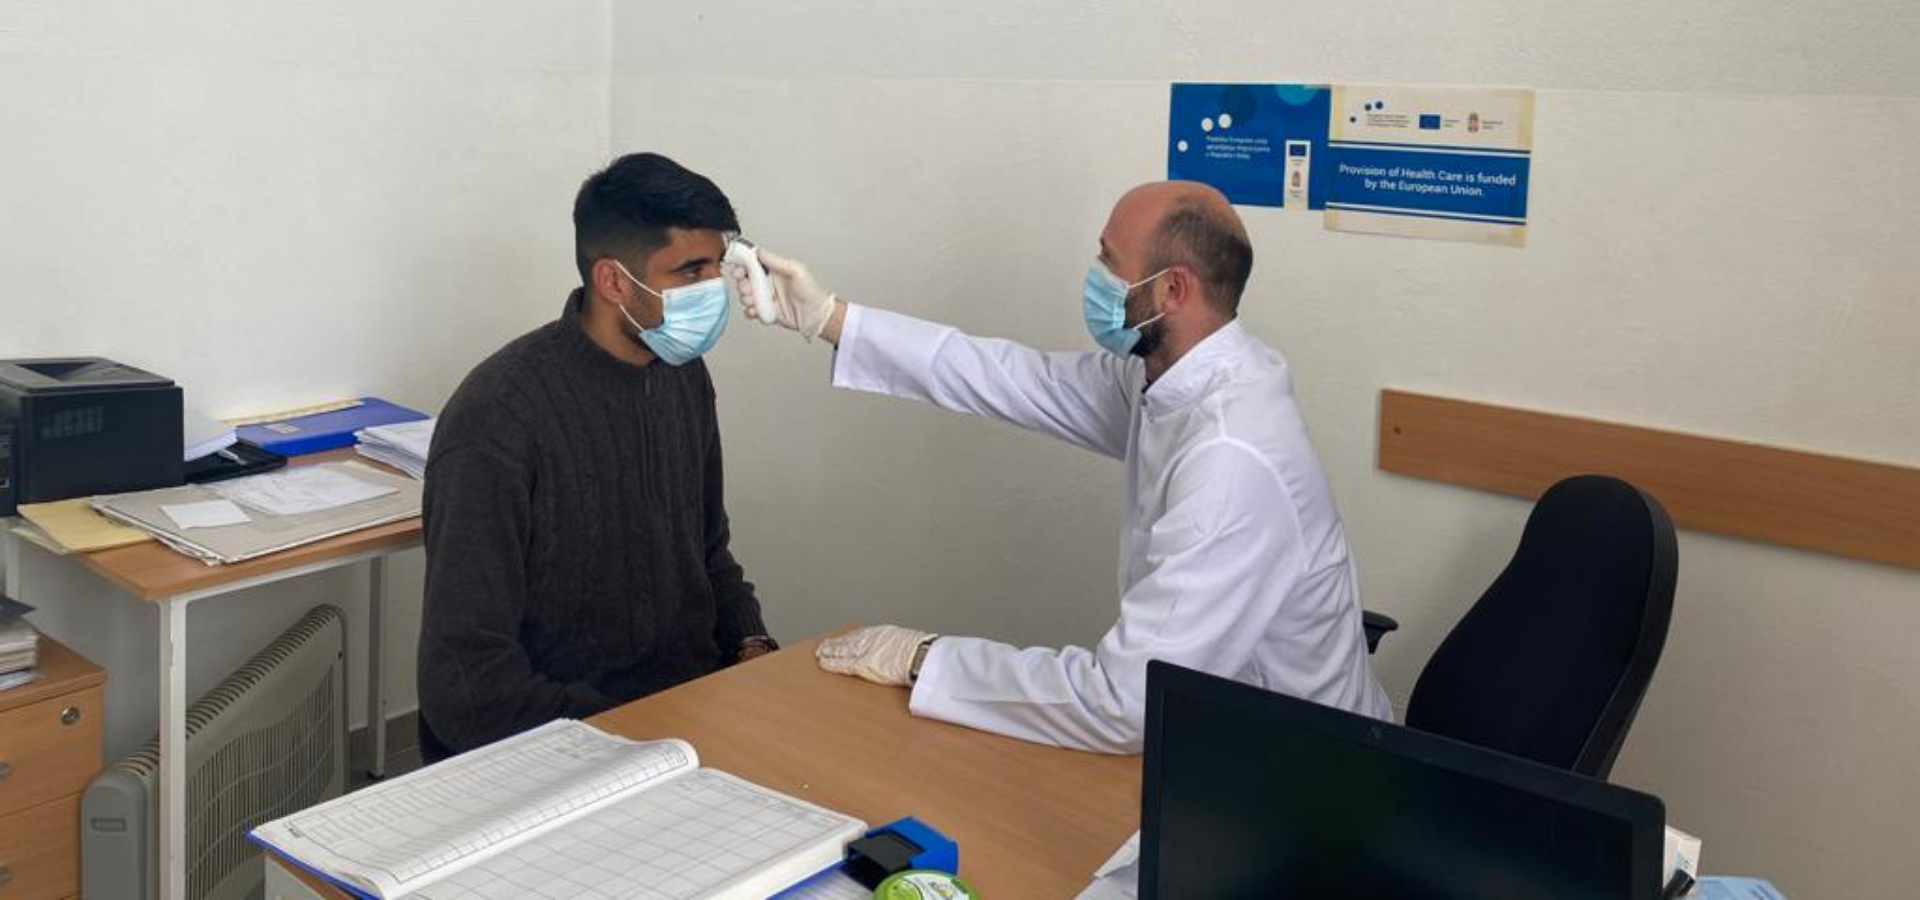 Vaccination of migrants against the COVID-19 virus continued